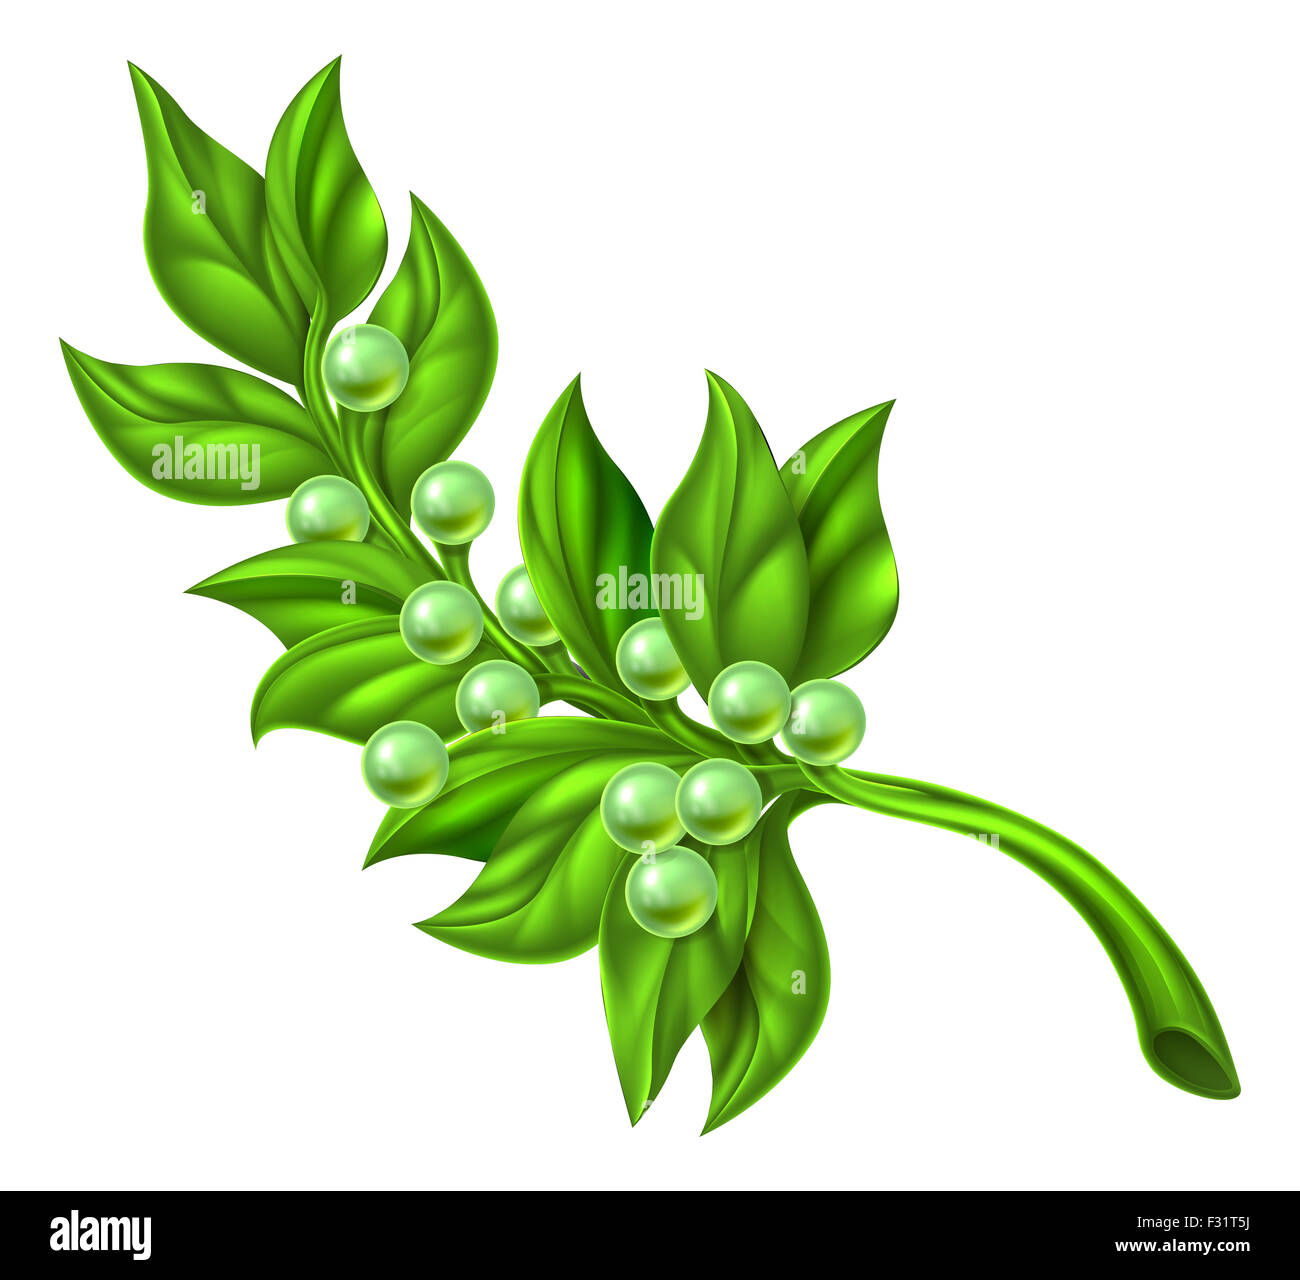 An illustration of an olive branch, the symbol of peace. Stock Photo